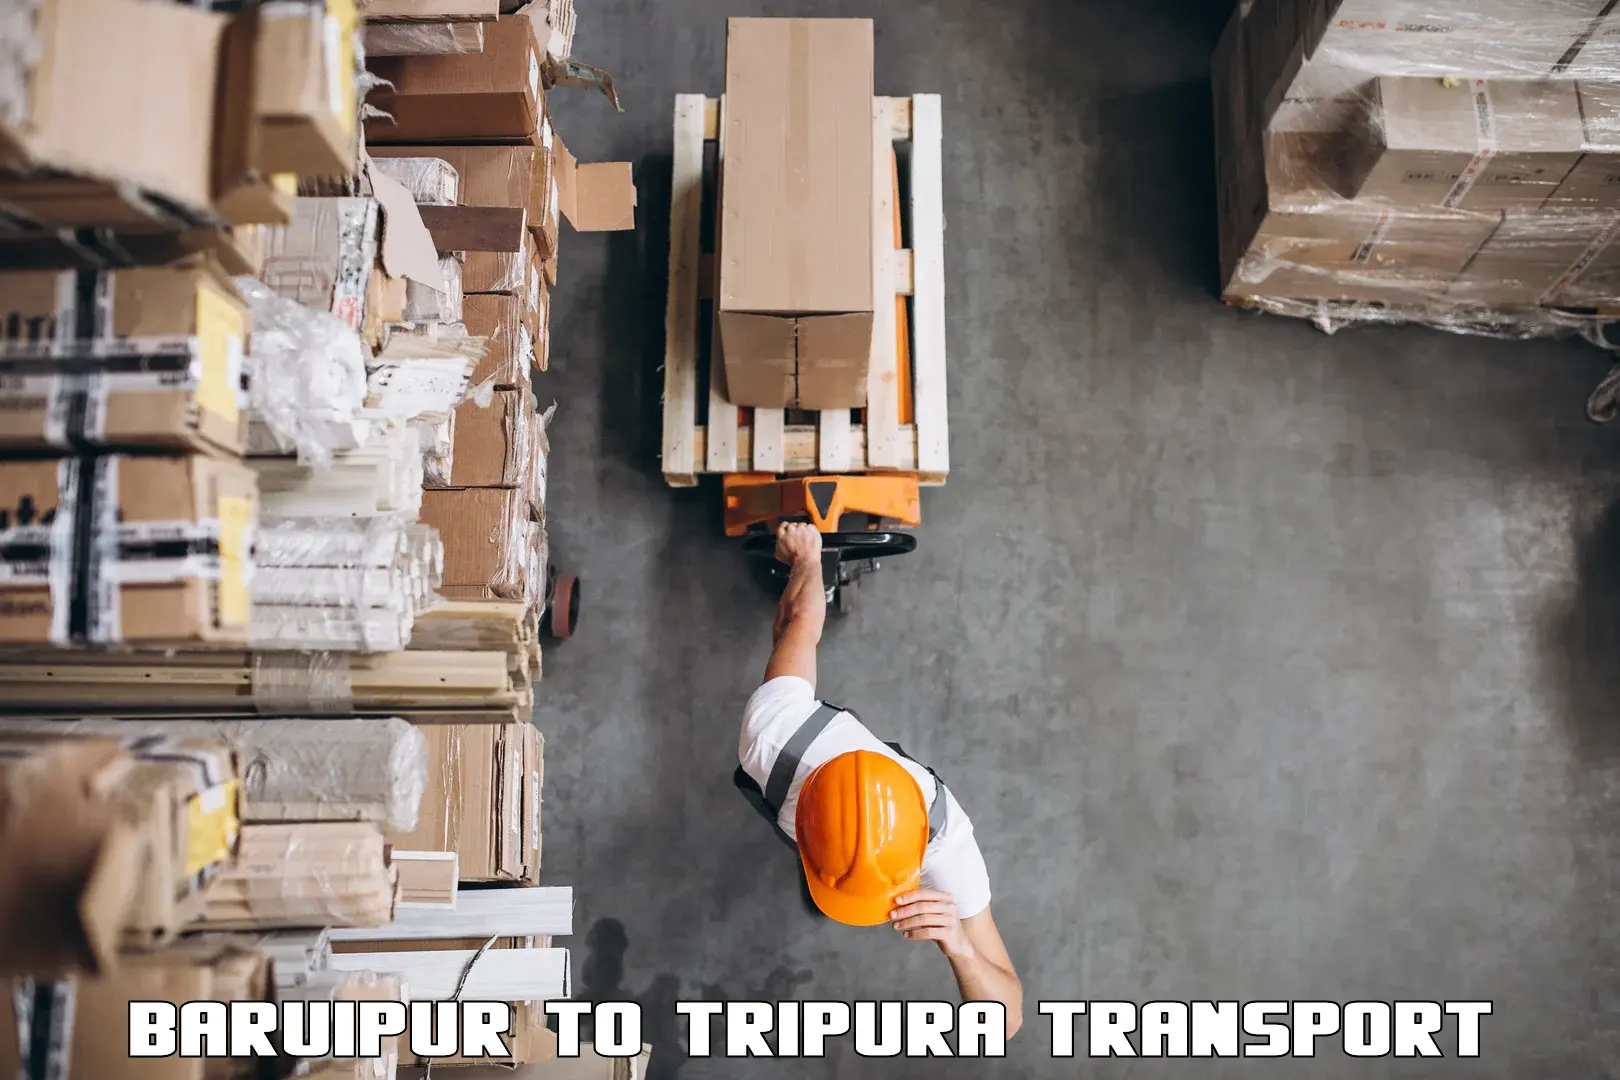 Daily transport service in Baruipur to Udaipur Tripura